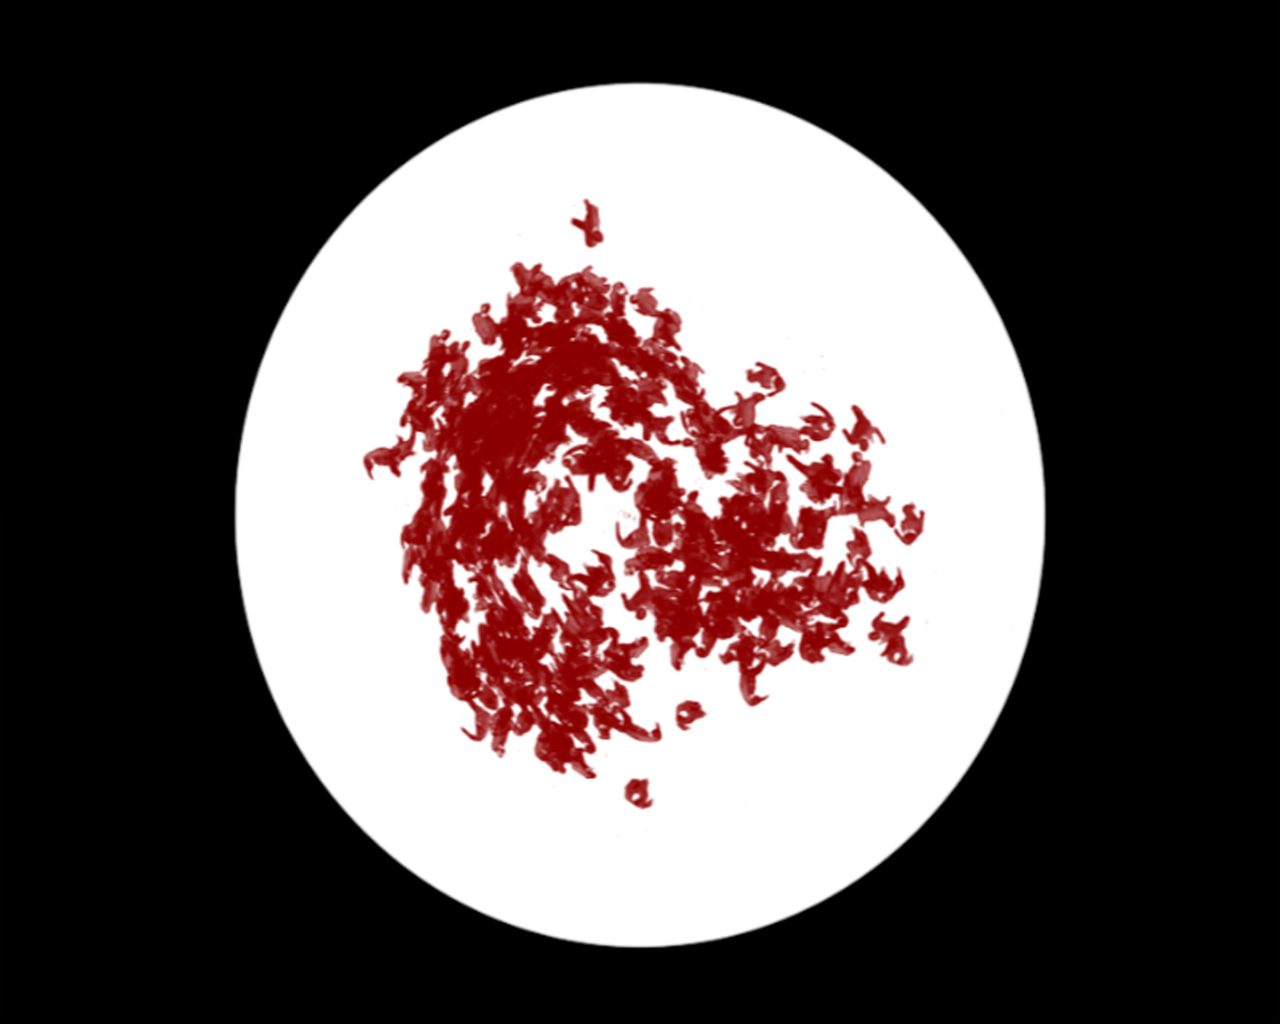 16 Shalechet Red In Circle 1280x1024